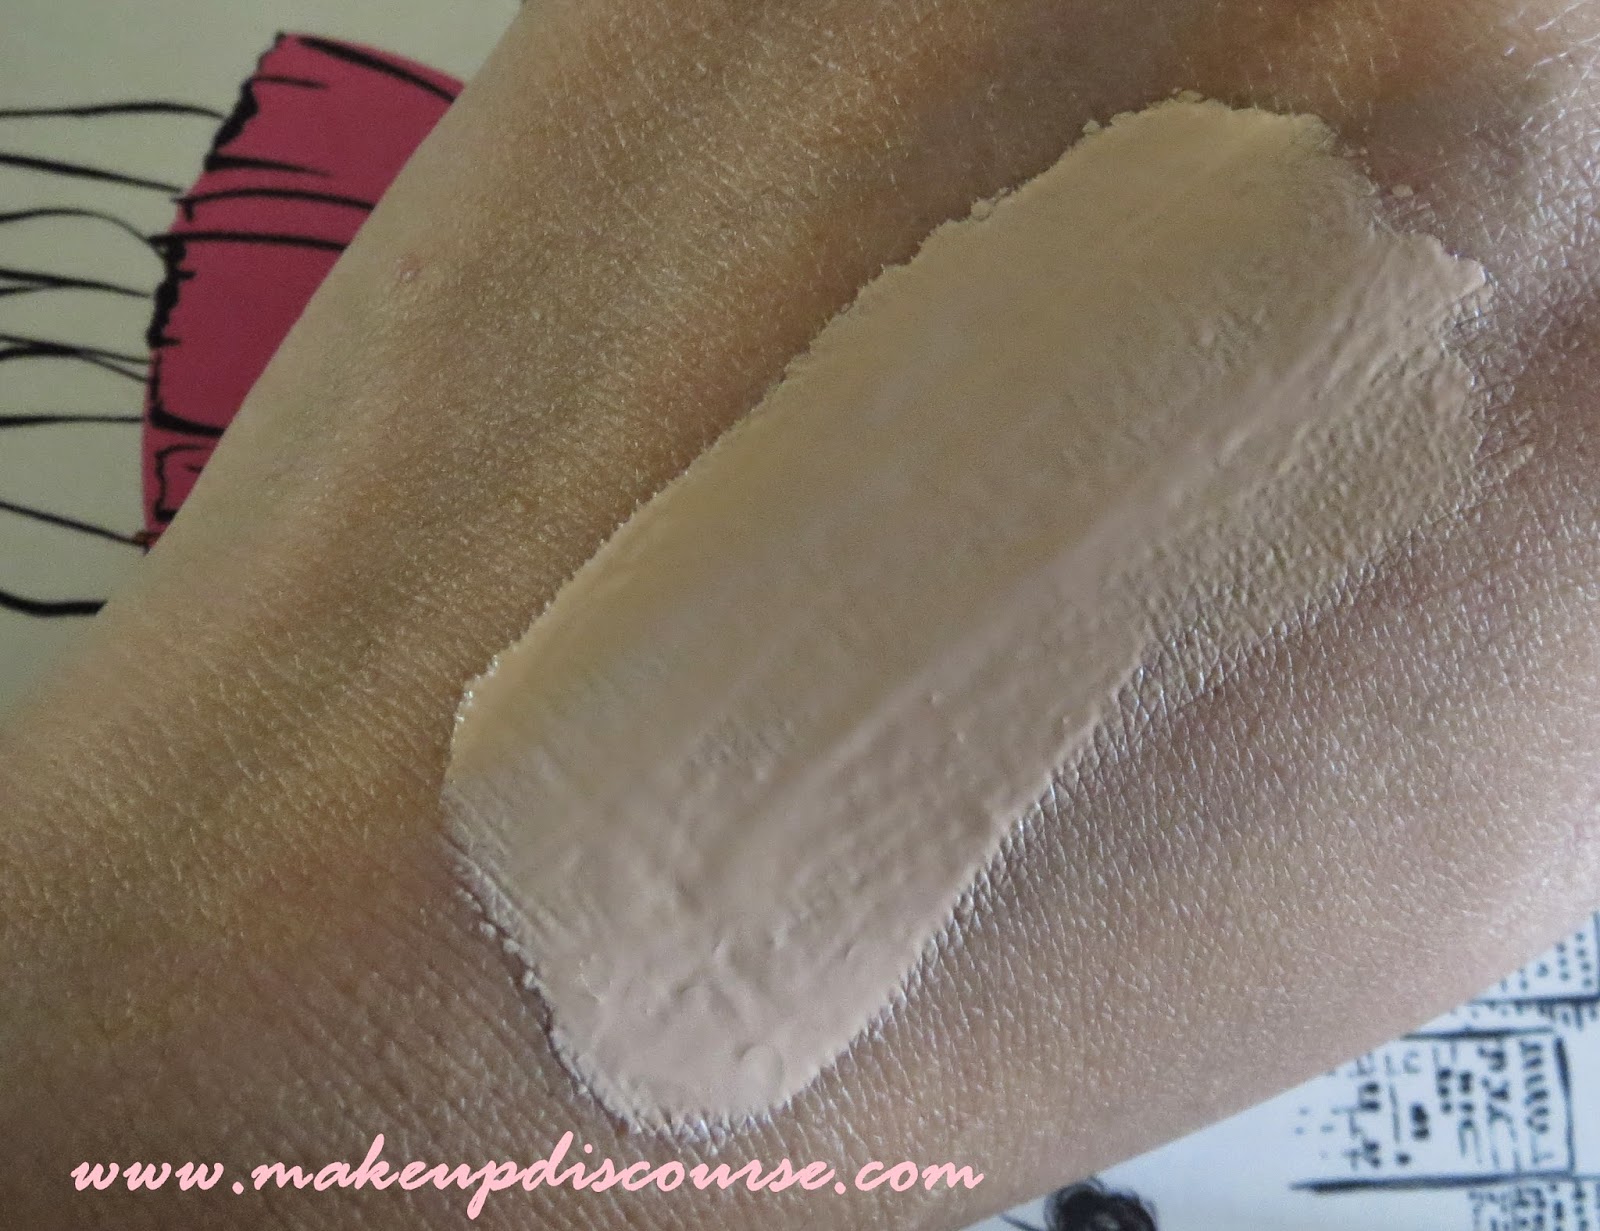 Bourjois 123 Perfect Foundation in 56 Beige Rose Swatch Review